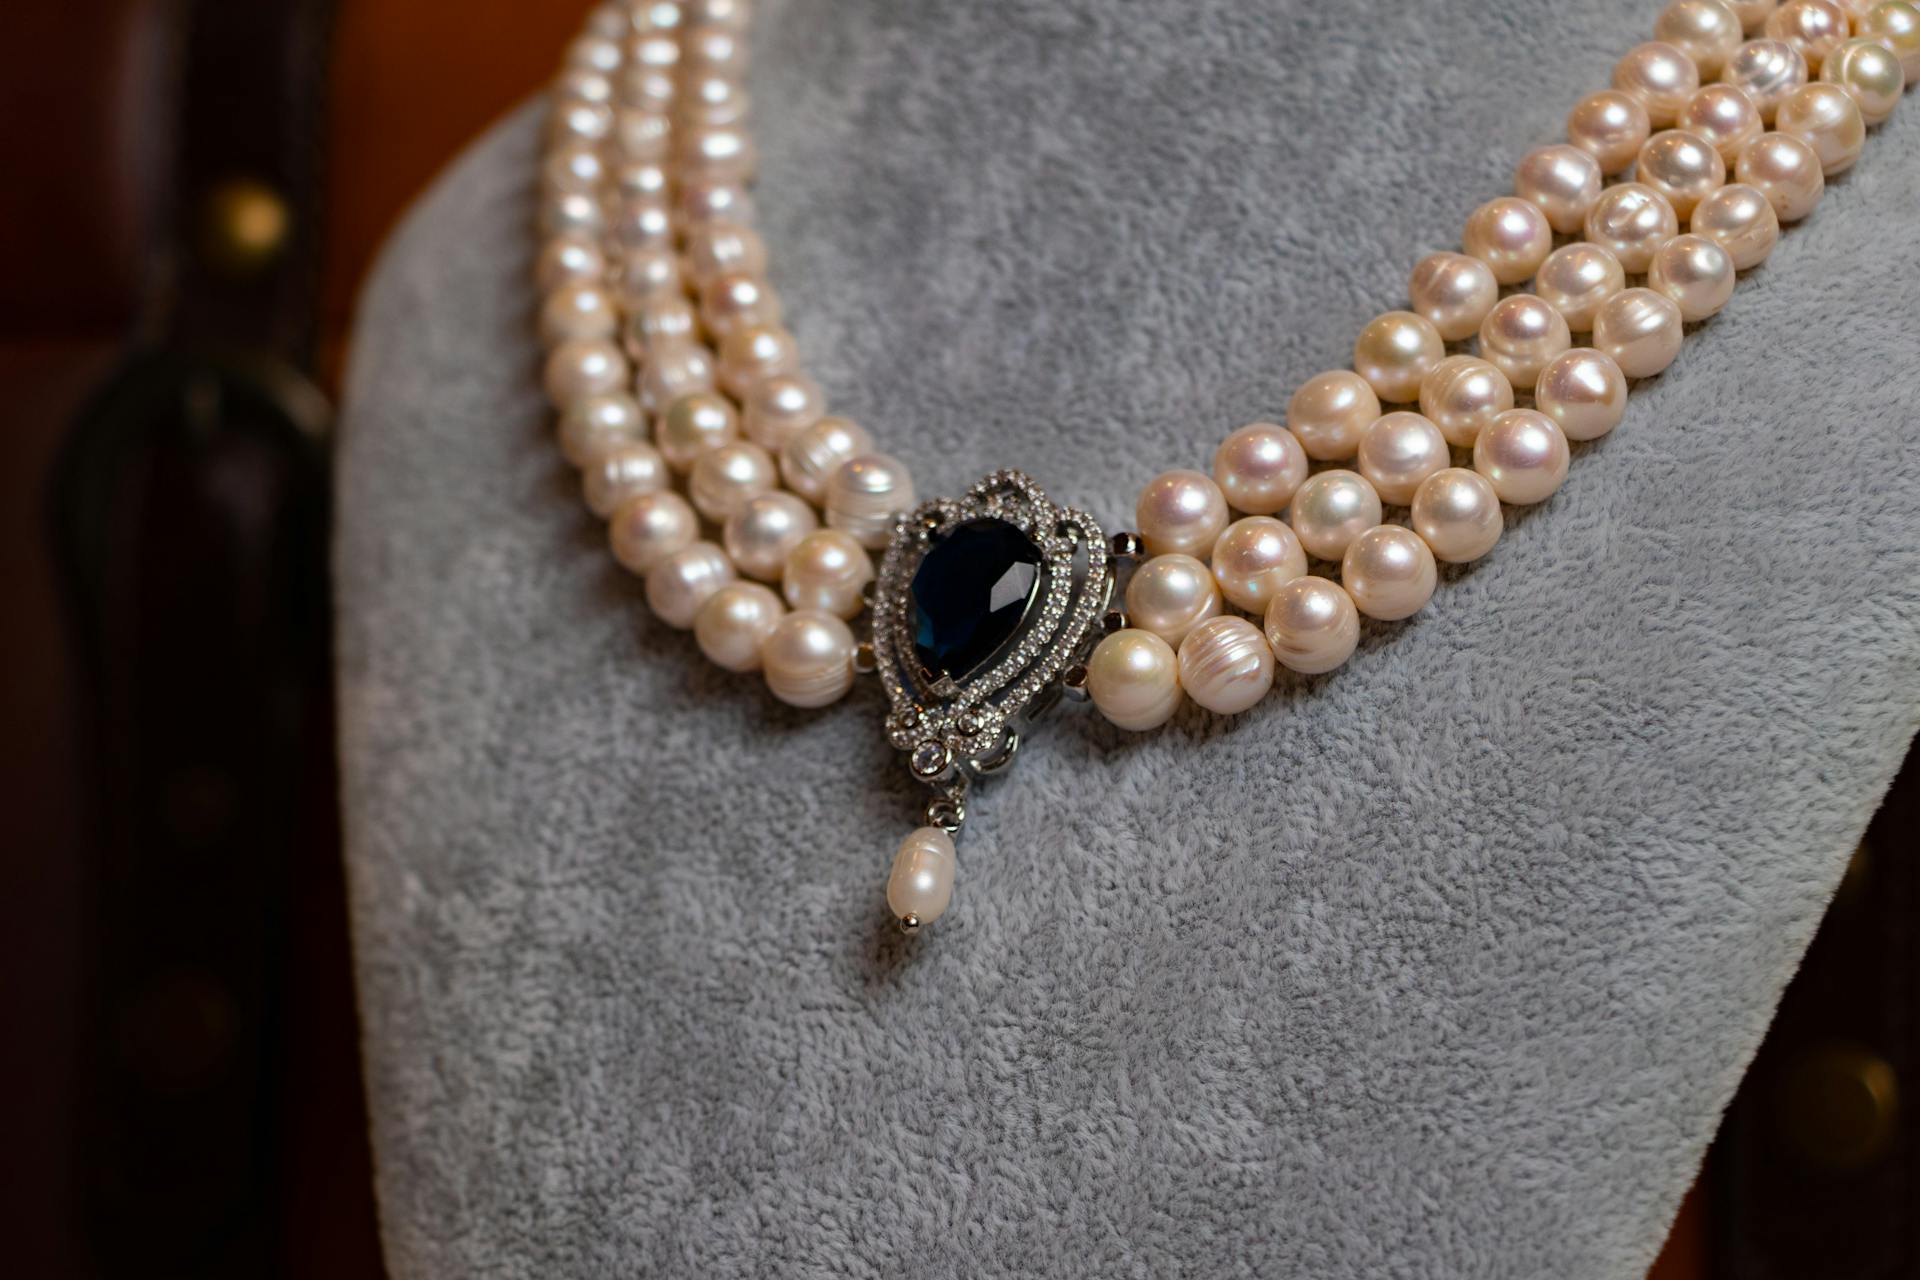 A pearl necklace with a dark gemstone | Source: Pexels